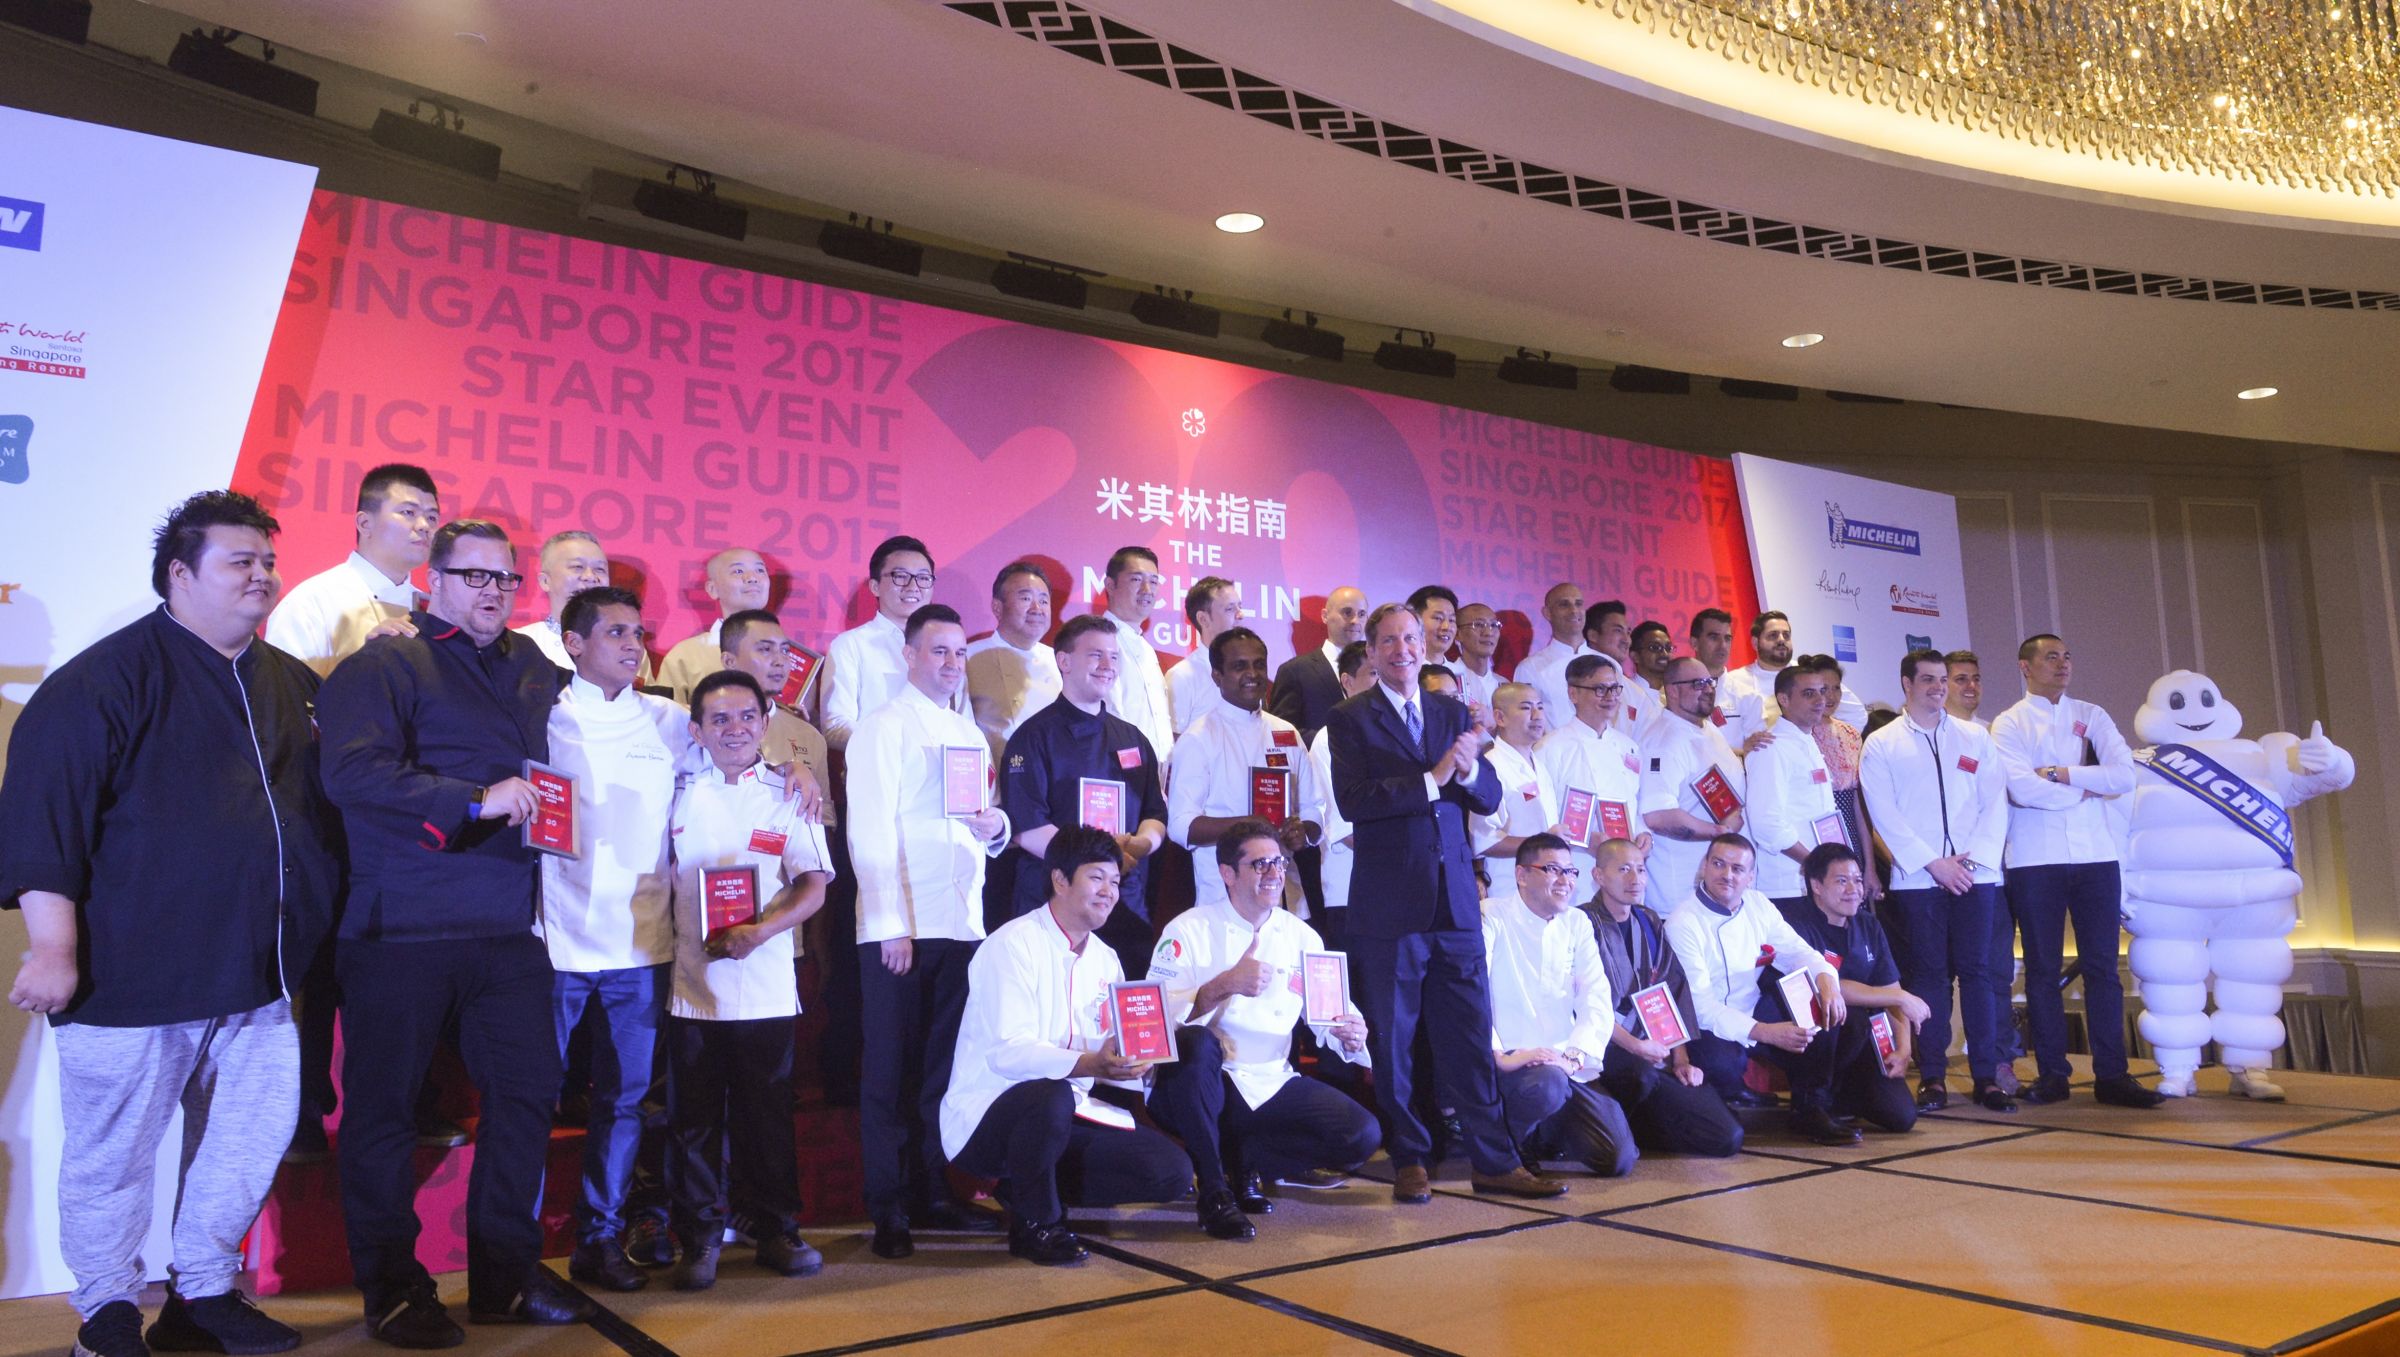 , Live updates from Michelin Guide Singapore 2017